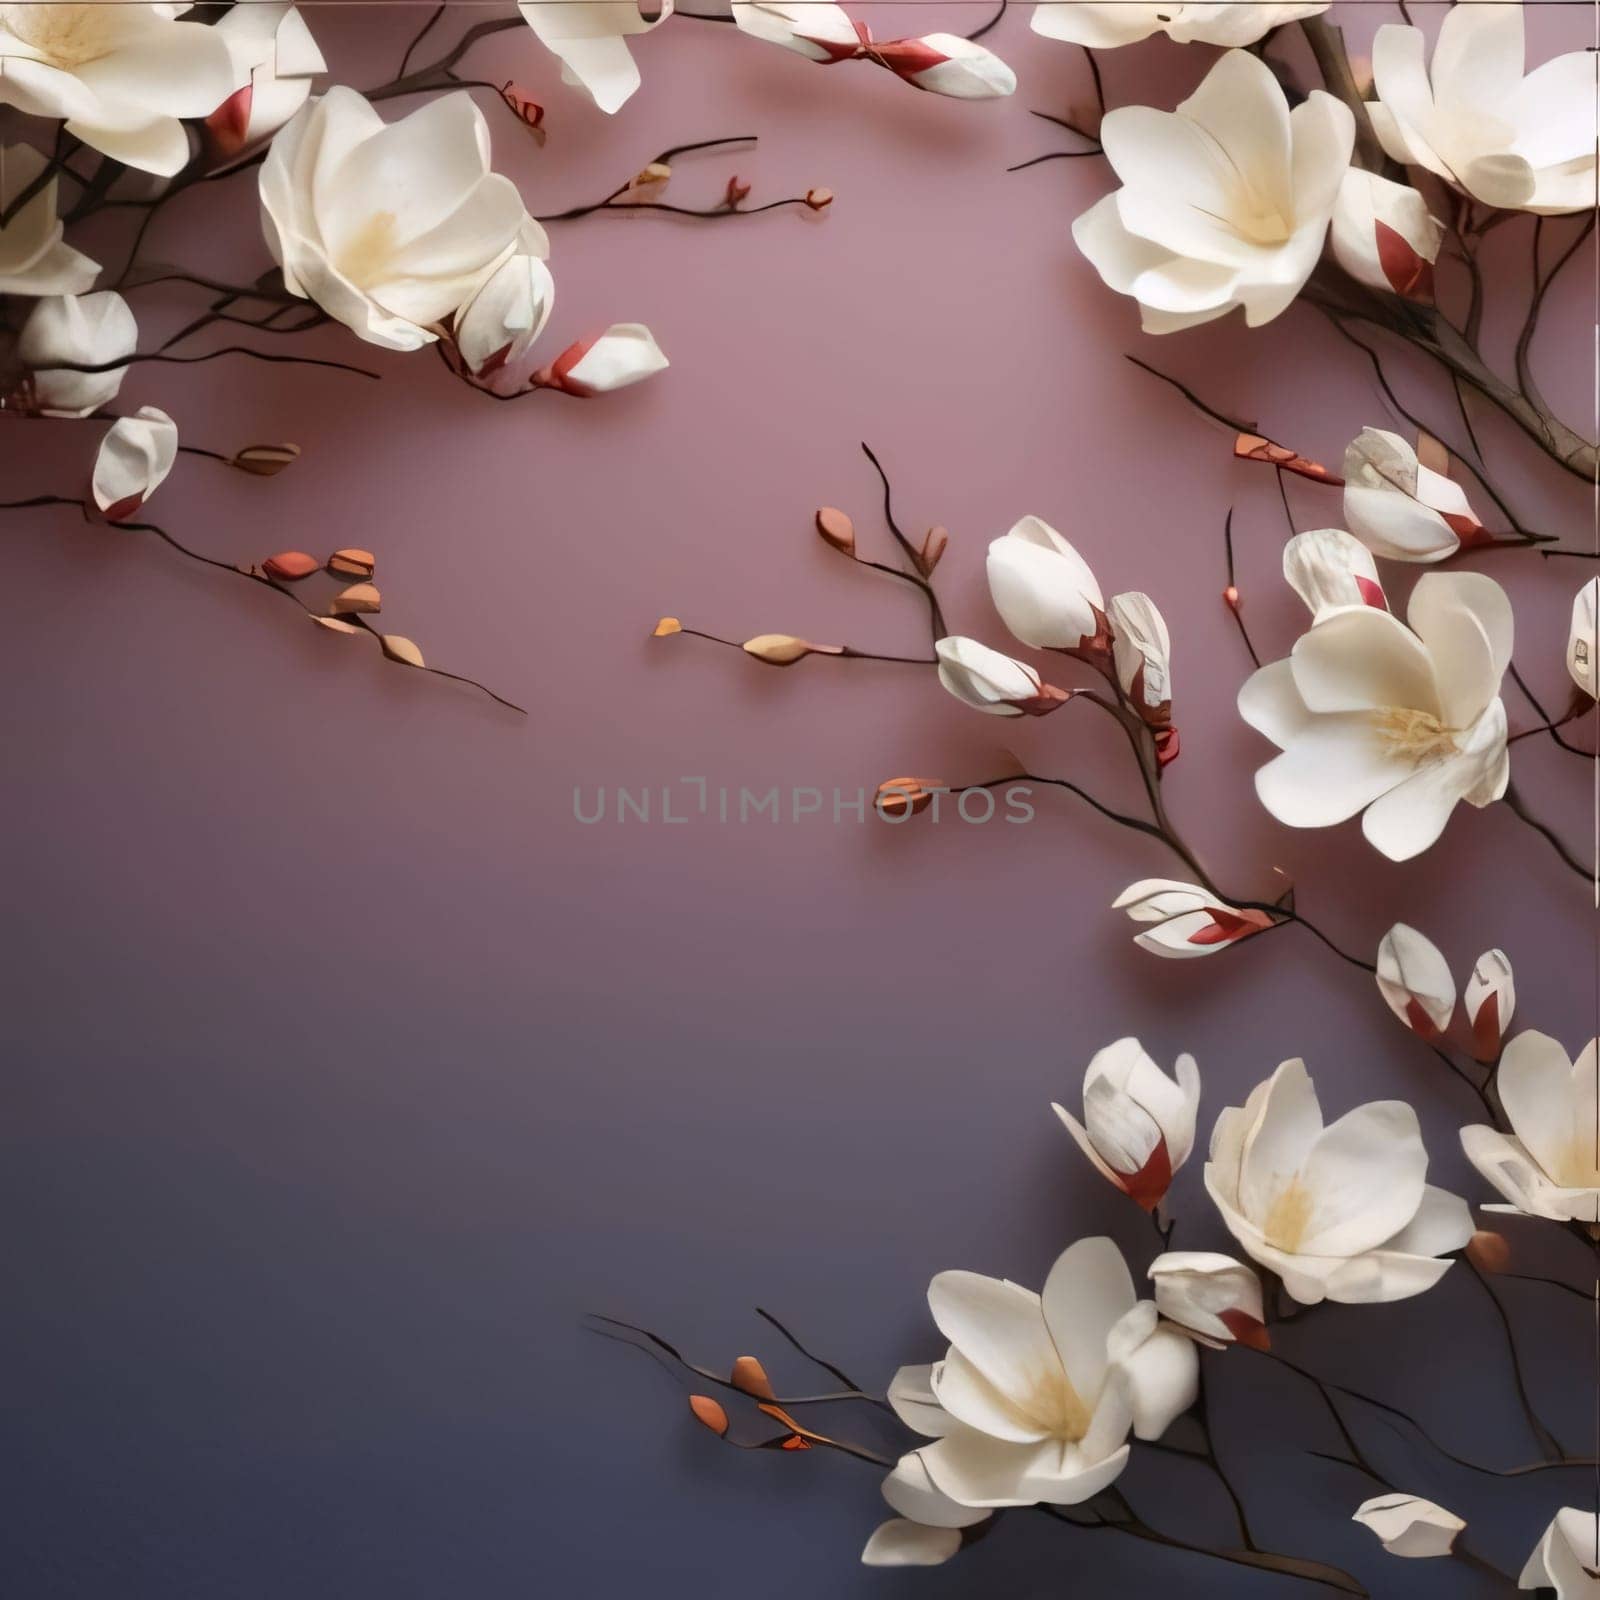 Small white flowers, petals on branches on a dark background banner with space for your own content. Flowering flowers, a symbol of spring, new life. A joyful time of nature awakening to life.